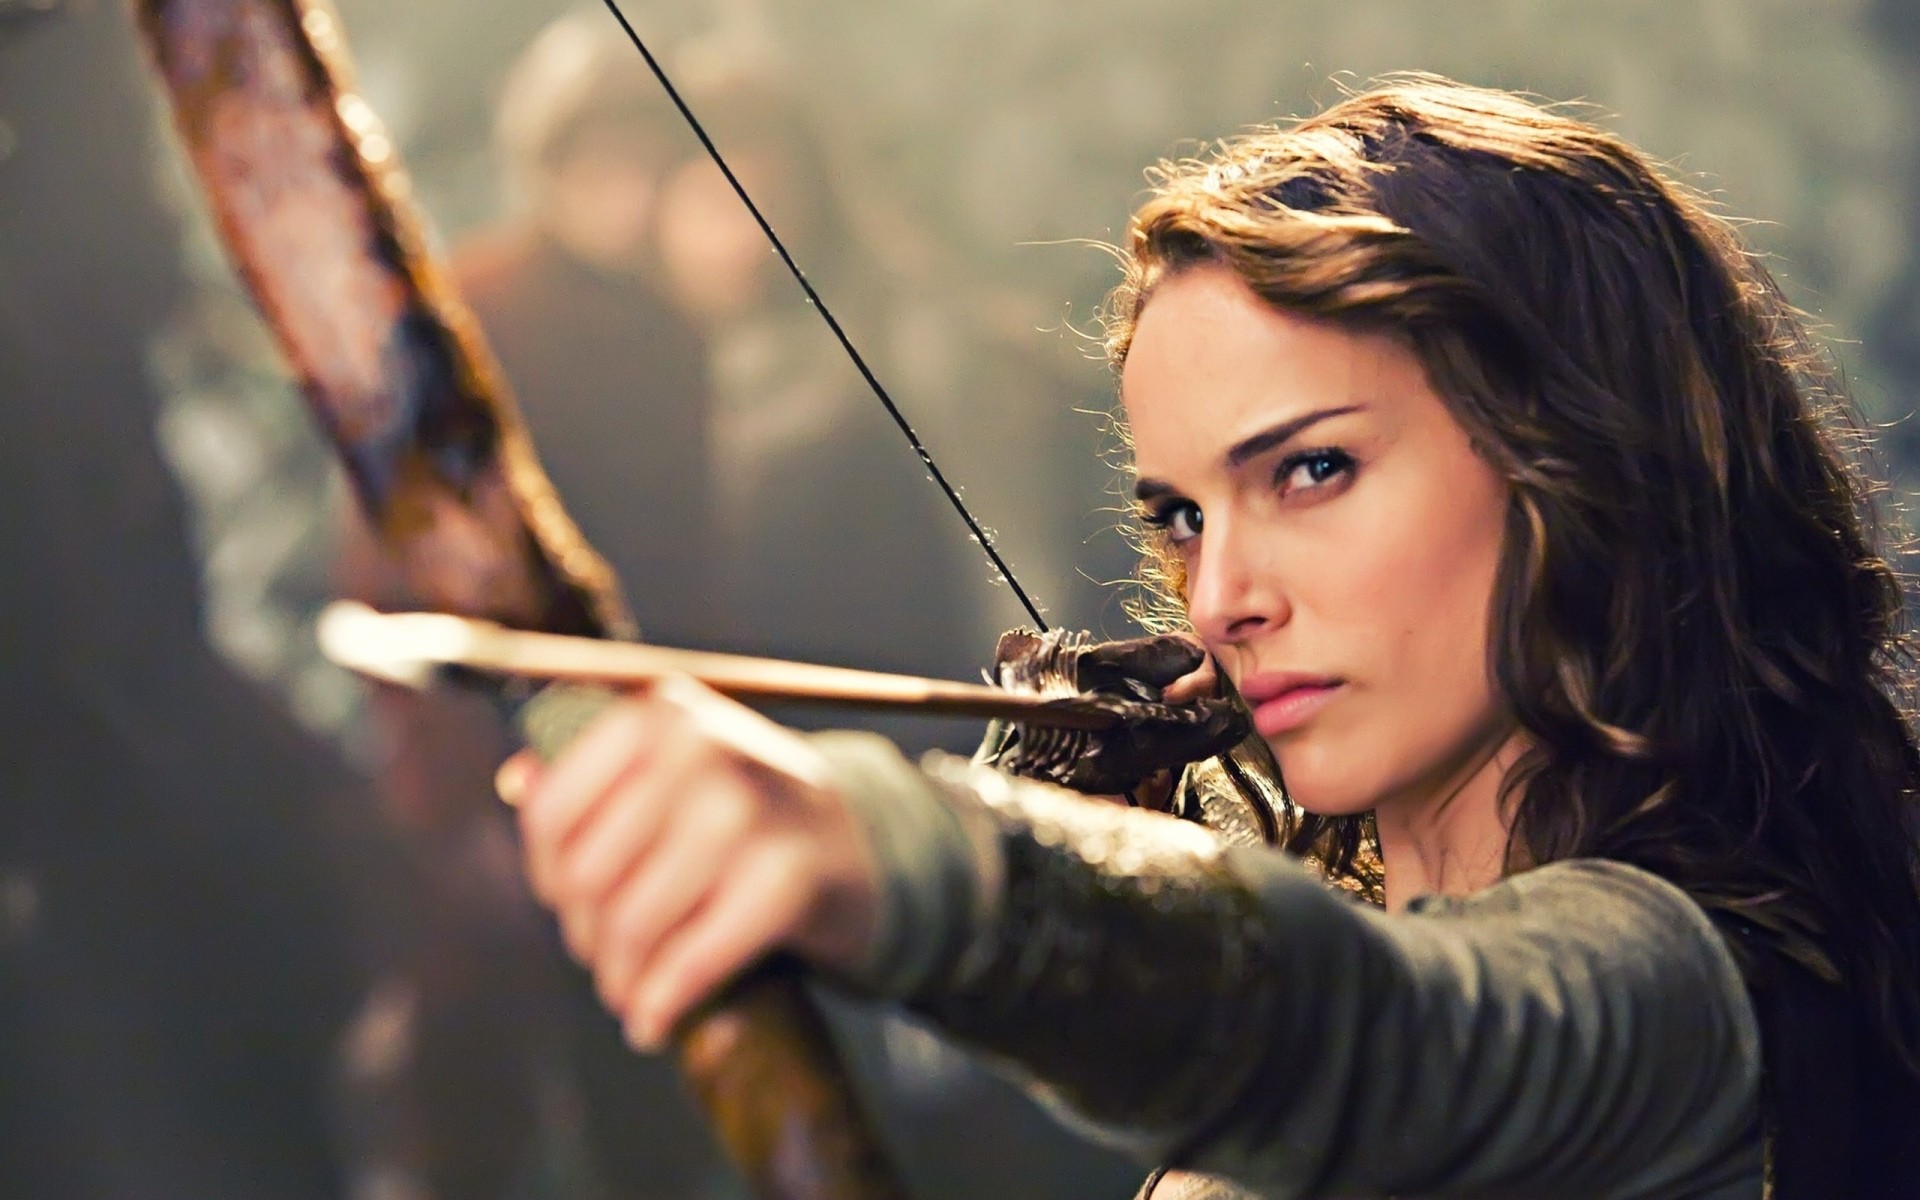 People 1920x1200 women Natalie Portman actress brunette aiming focused long hair archer bow movies bow and arrow fantasy girl arrows film stills